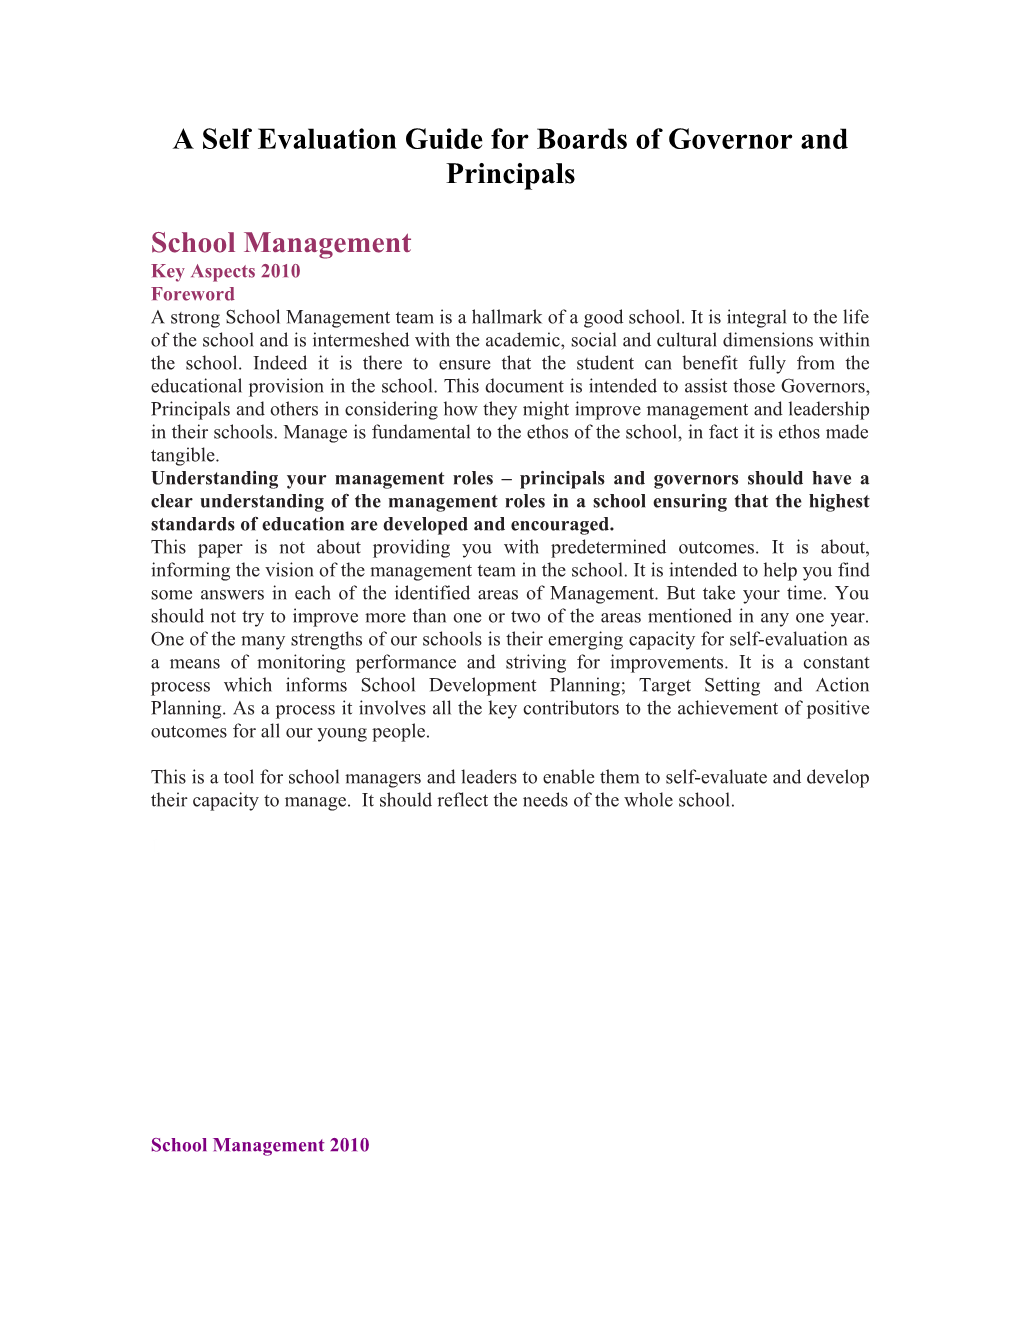 A Self Evaluation Guide for Boards of Governors and Principals